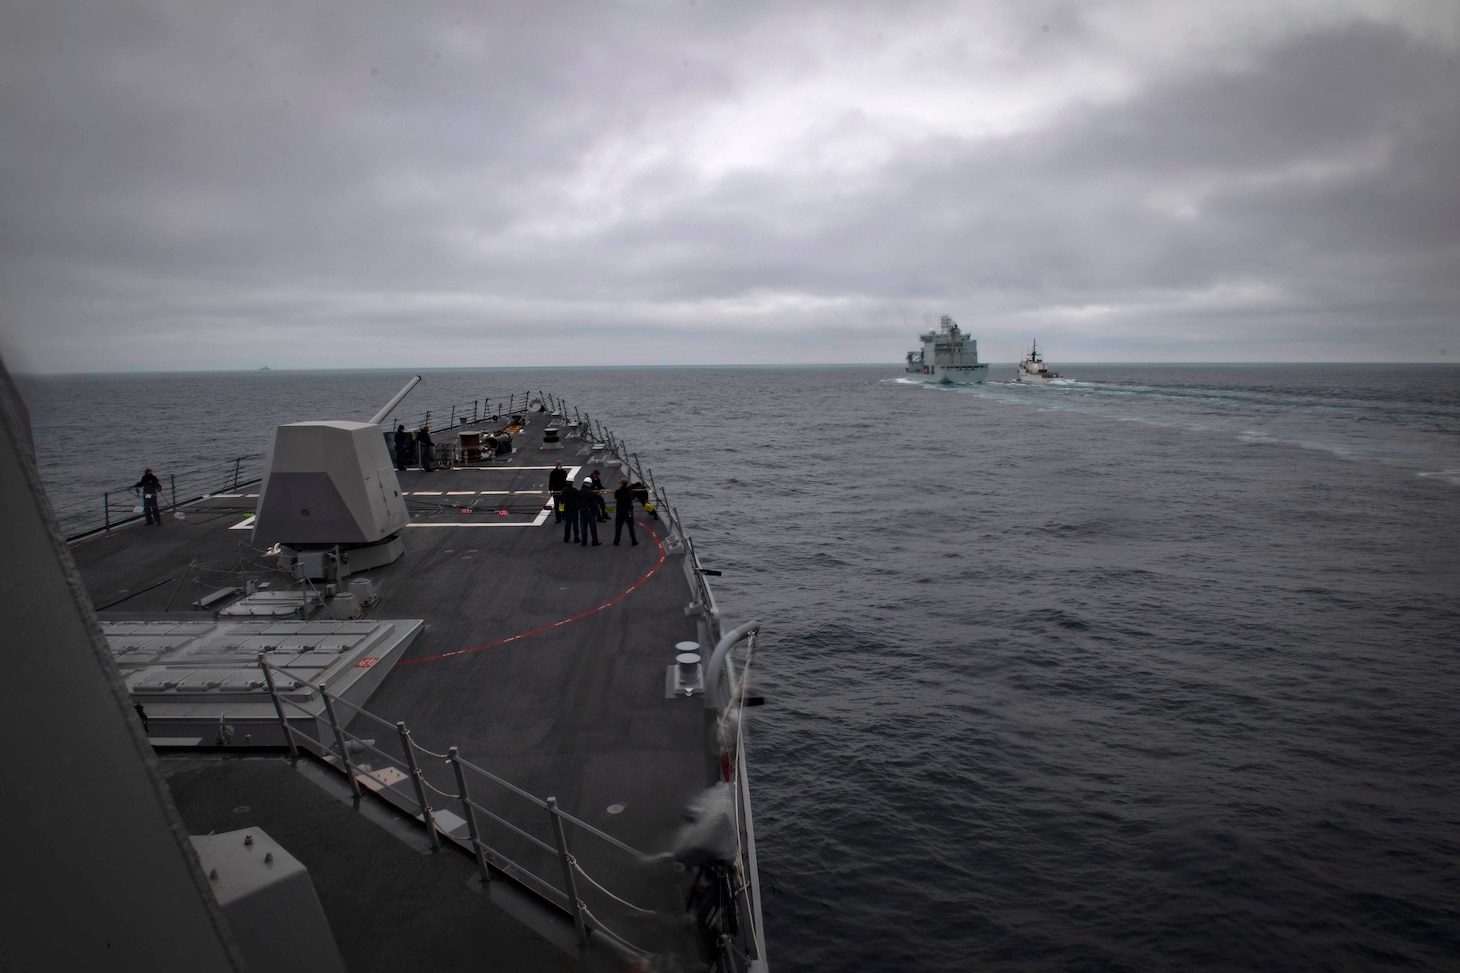 The Arleigh Burke-class guided-missile destroyer USS Thomas Hudner (DDG 116) moves alongside Royal Canadian ship MV Asterix during a replenishment-at-sea approach drill between the U.S. Coast Guard, US Navy and Royal Canadian Navy, Aug. 5, 2020.